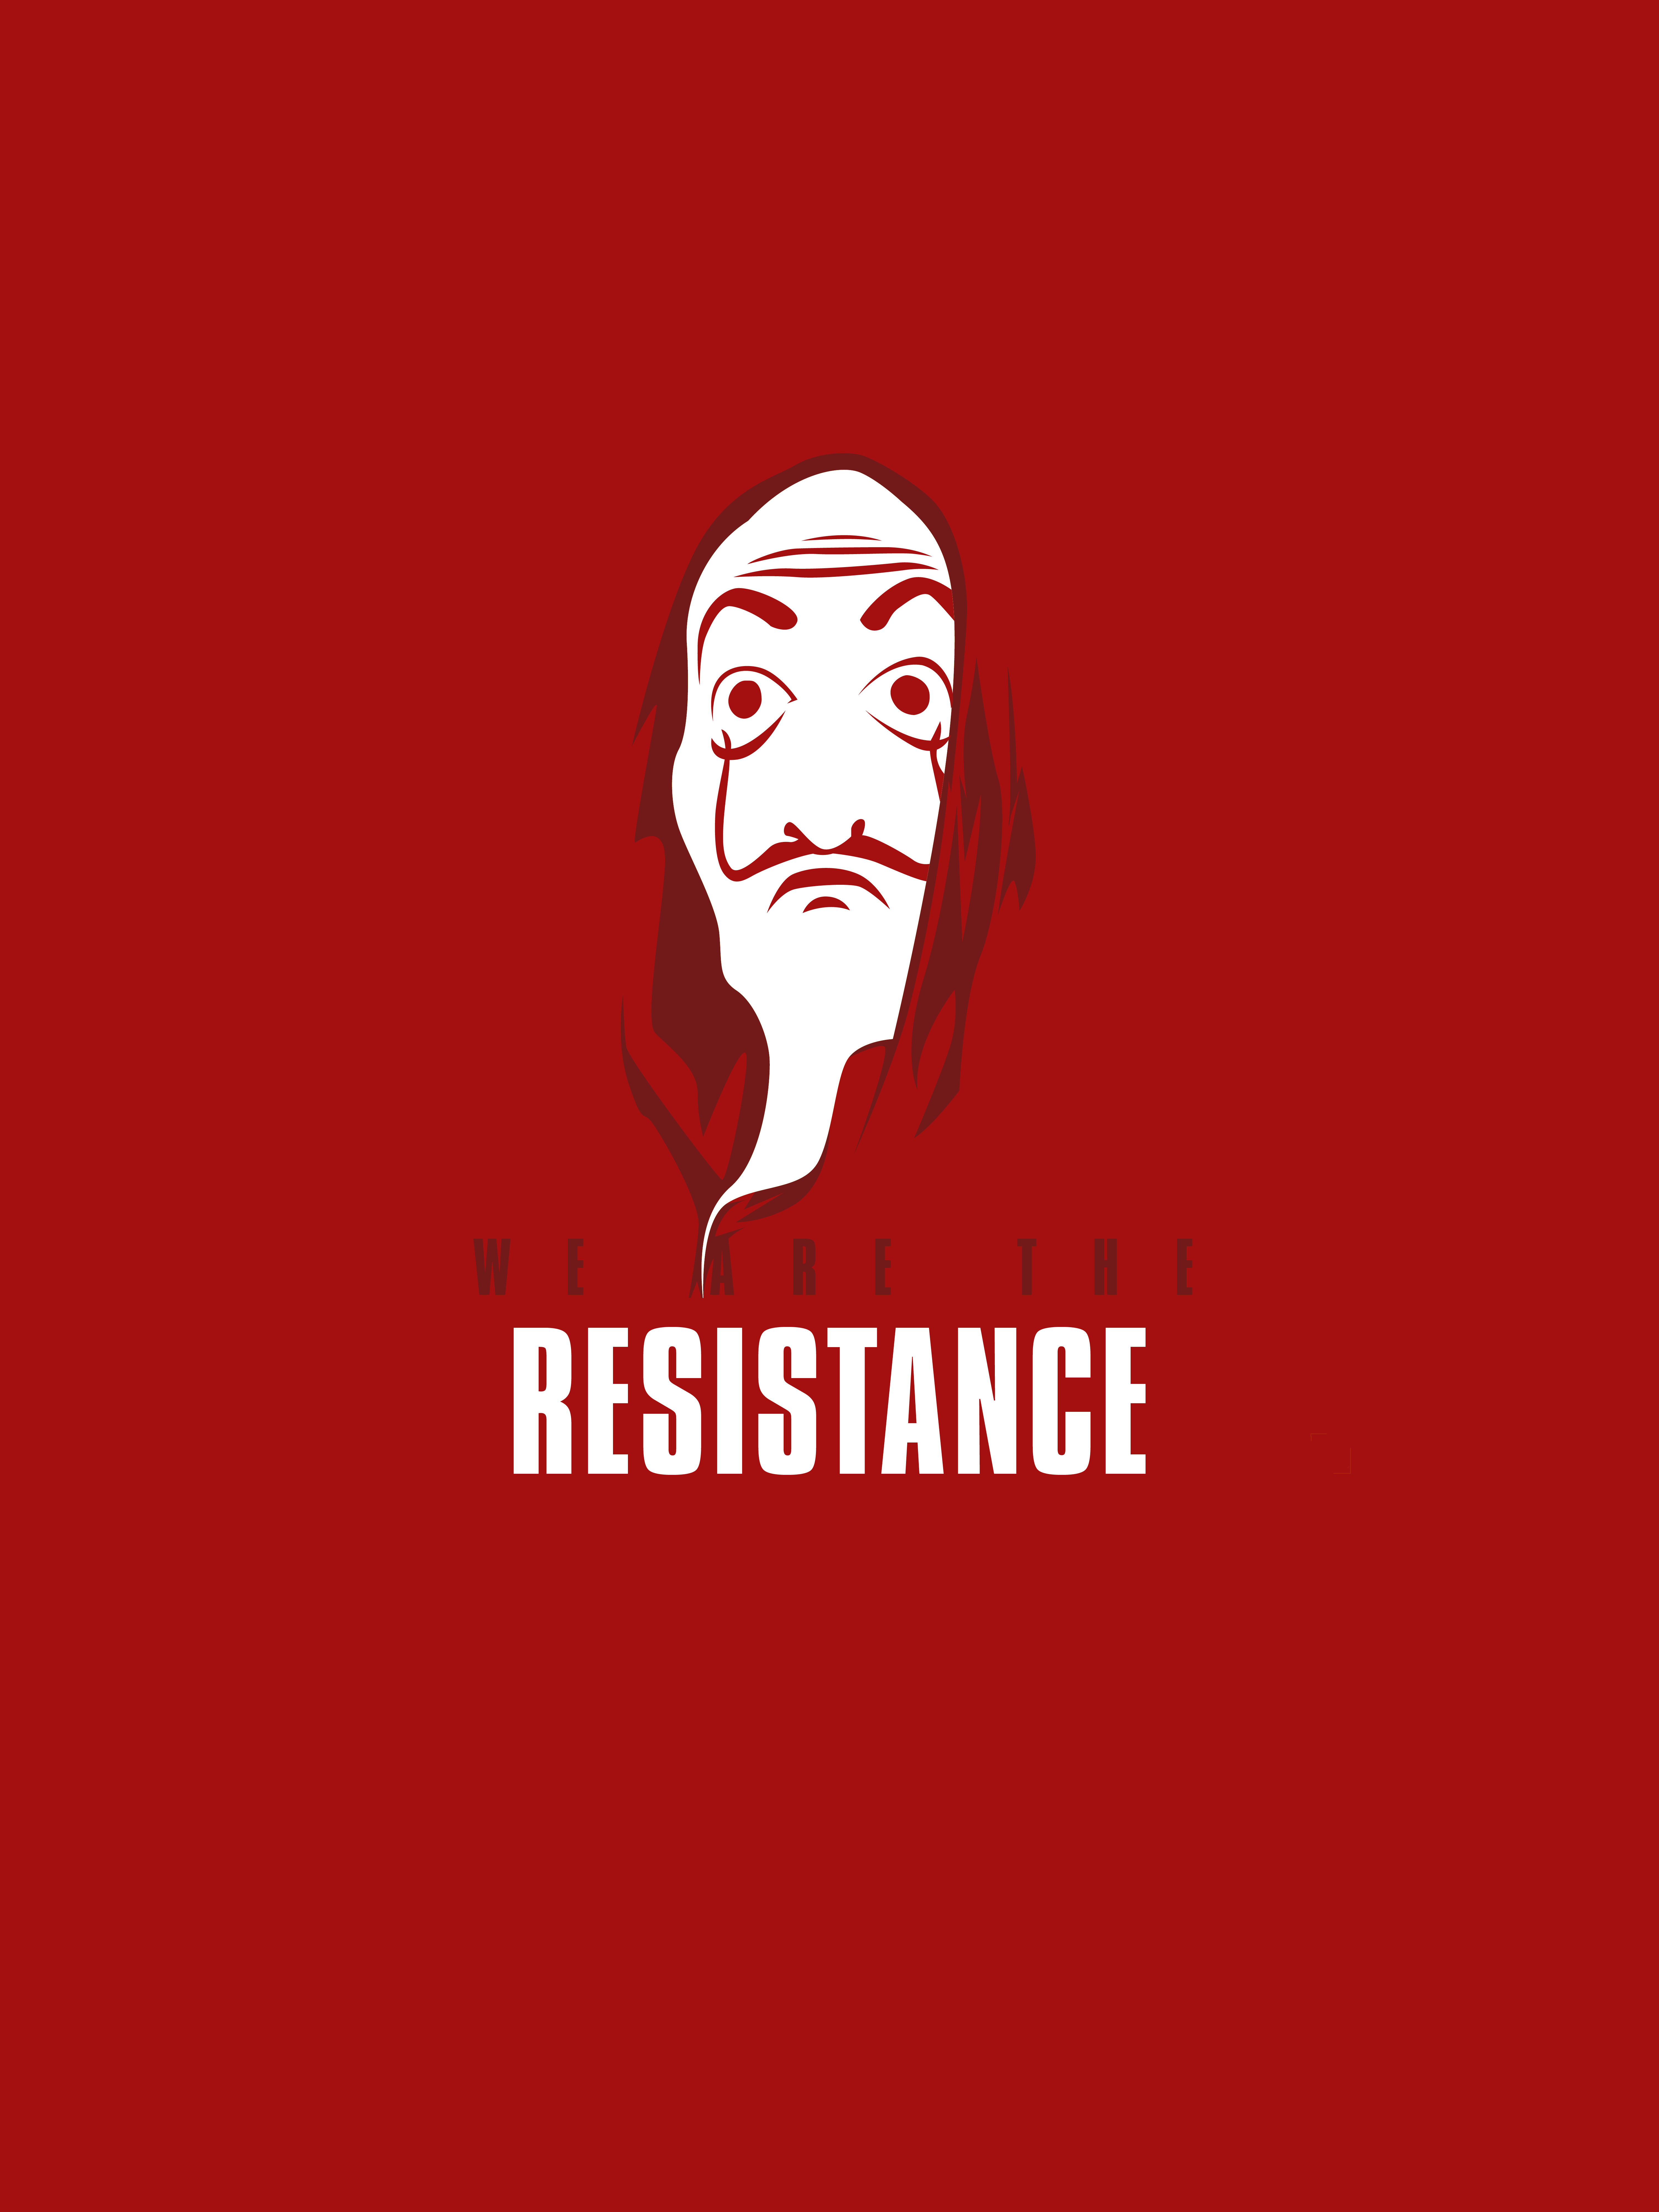 We Are The Resistance Wallpaper HD Minimalist 4k